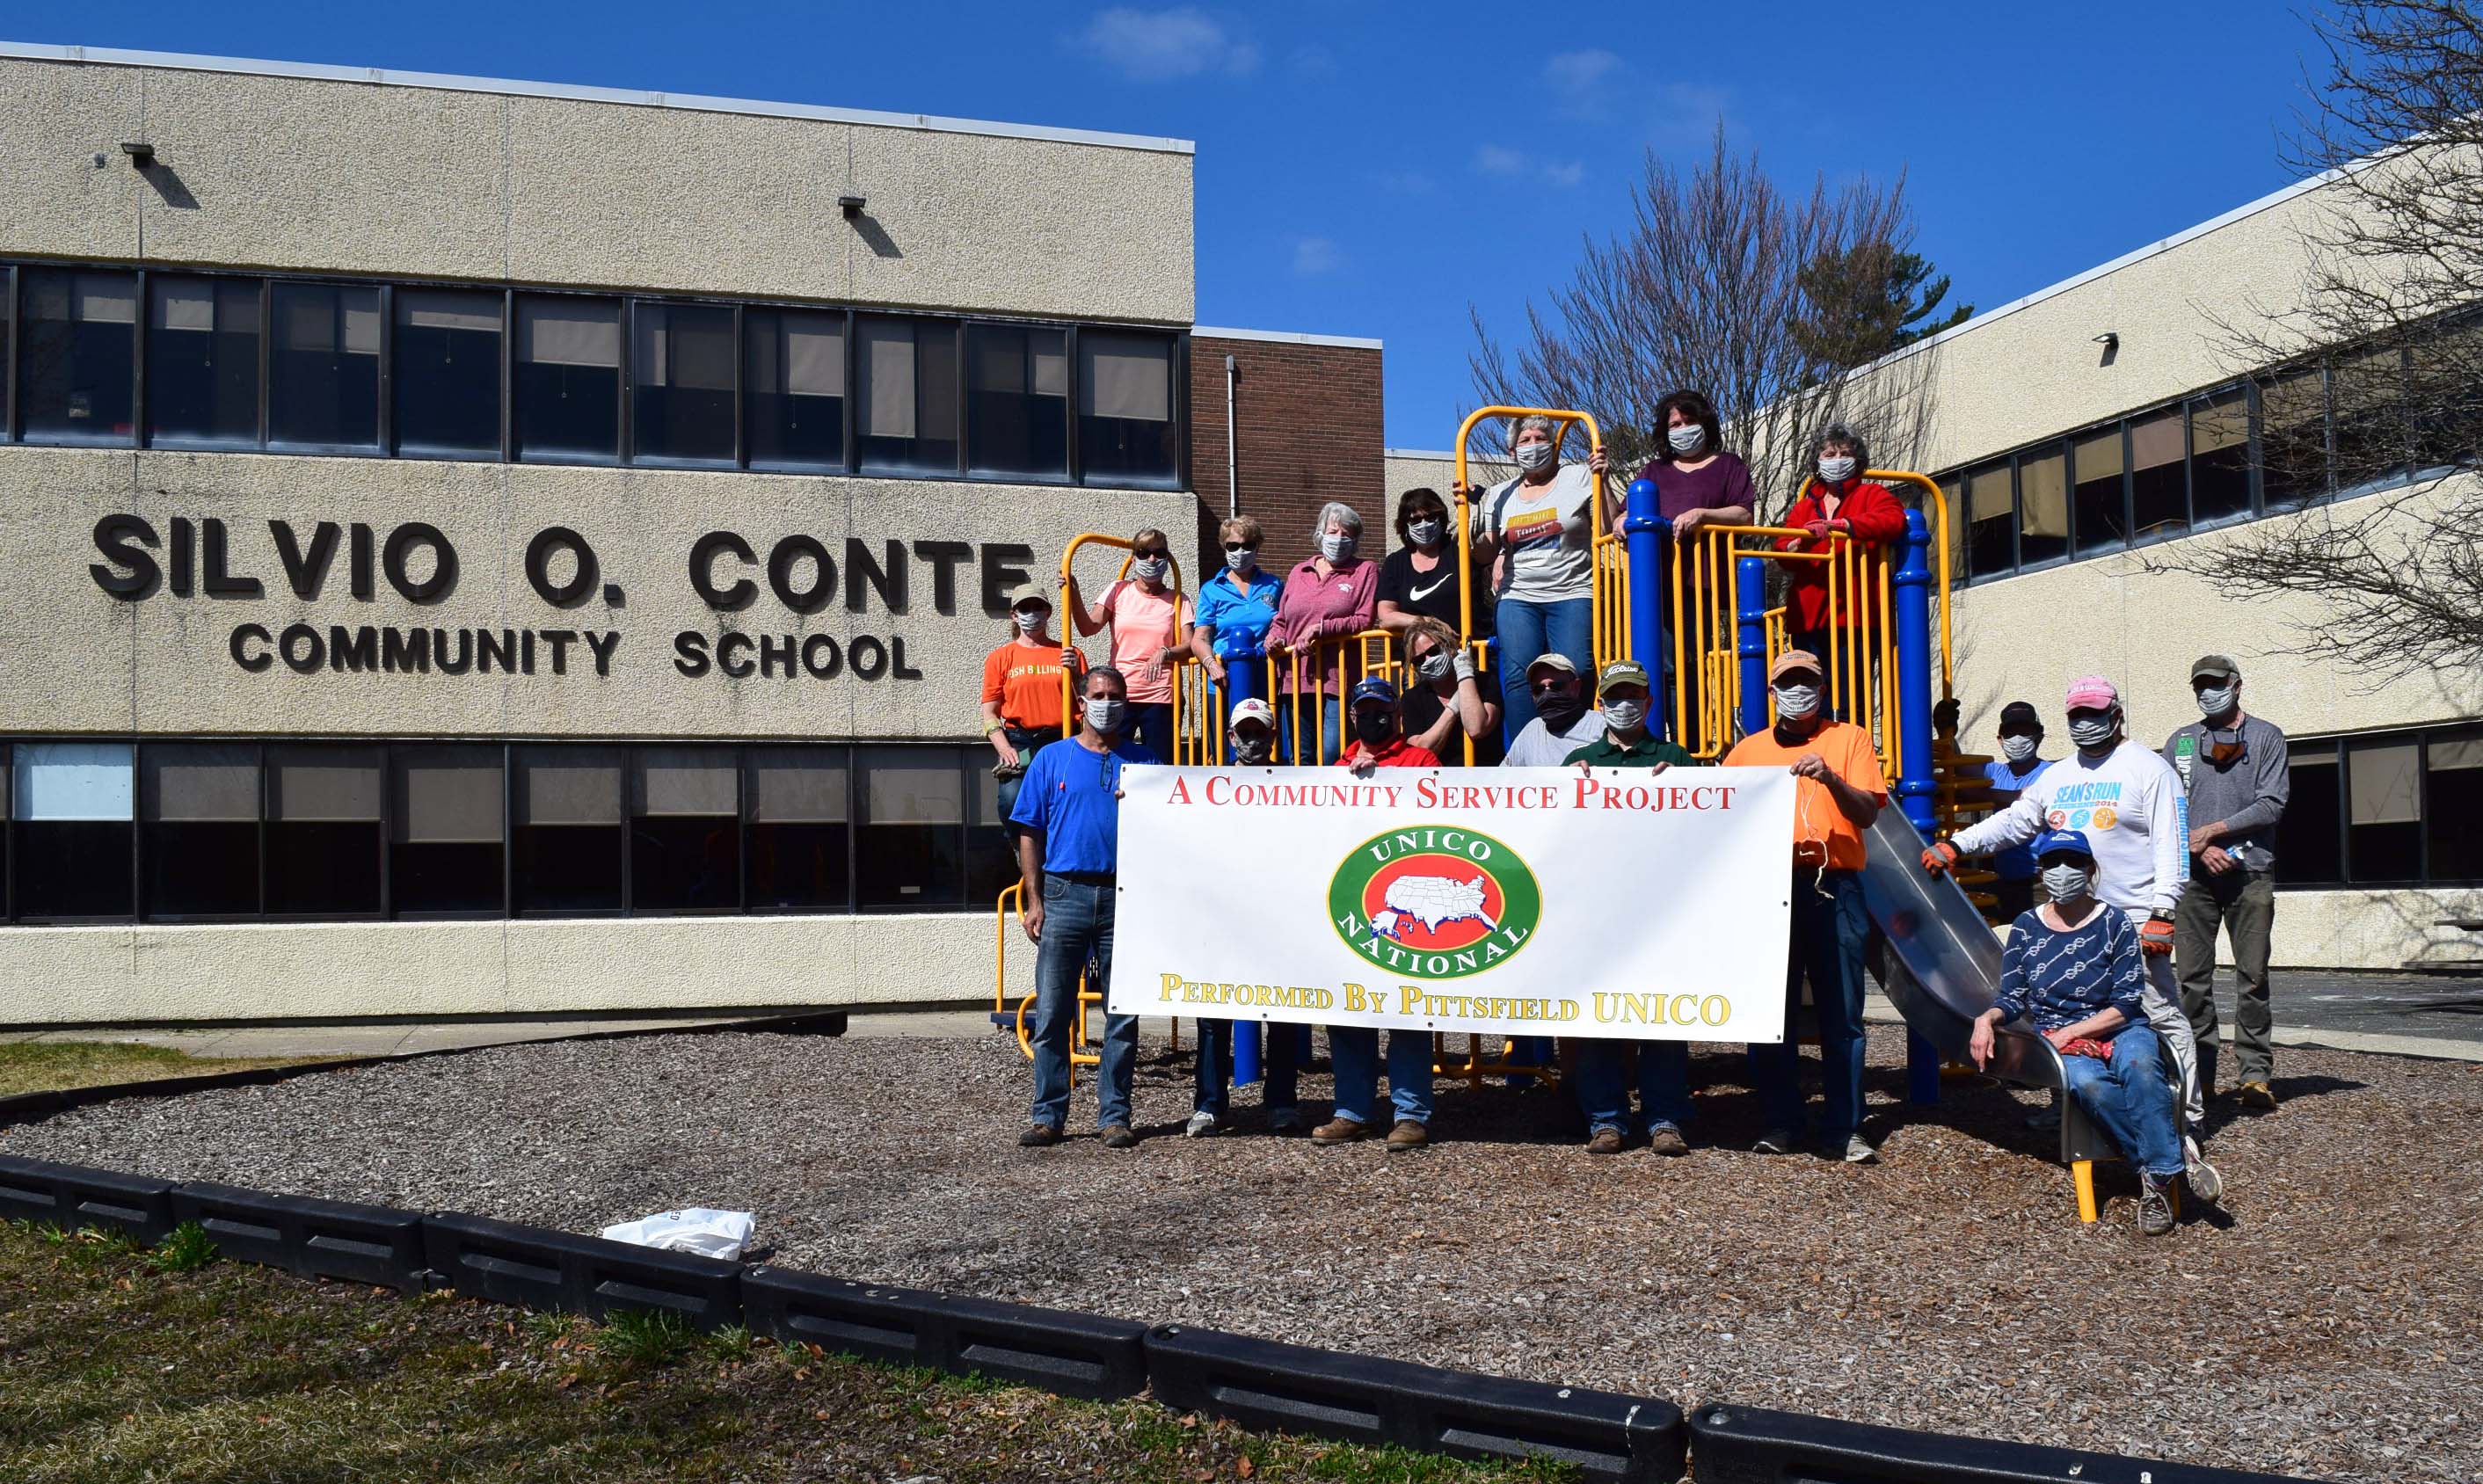 Team from Pittsfield UNICO cleaned up around Silvio O. Conte Community School.